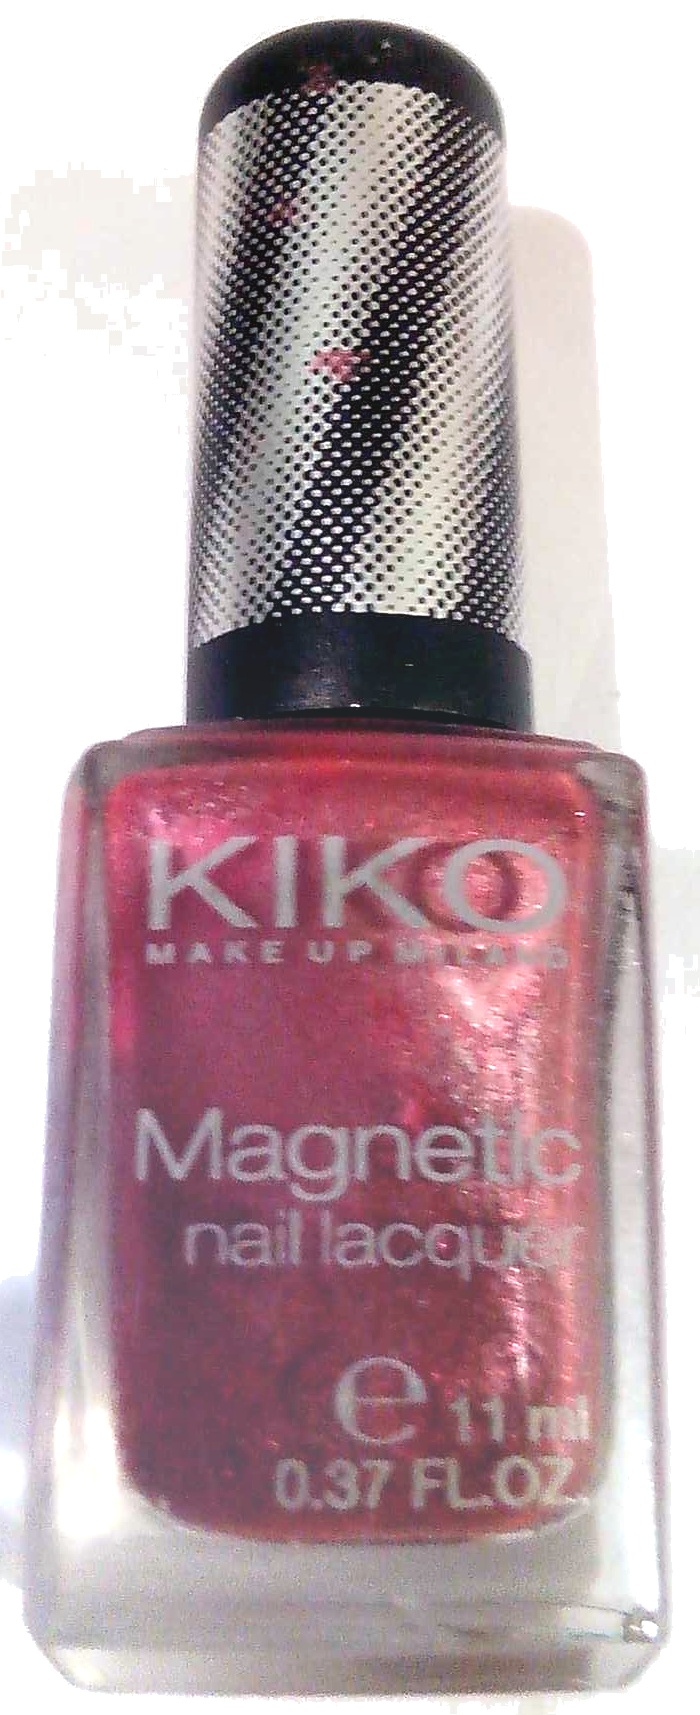 Magnetic nail lacquer - Tuote - fr